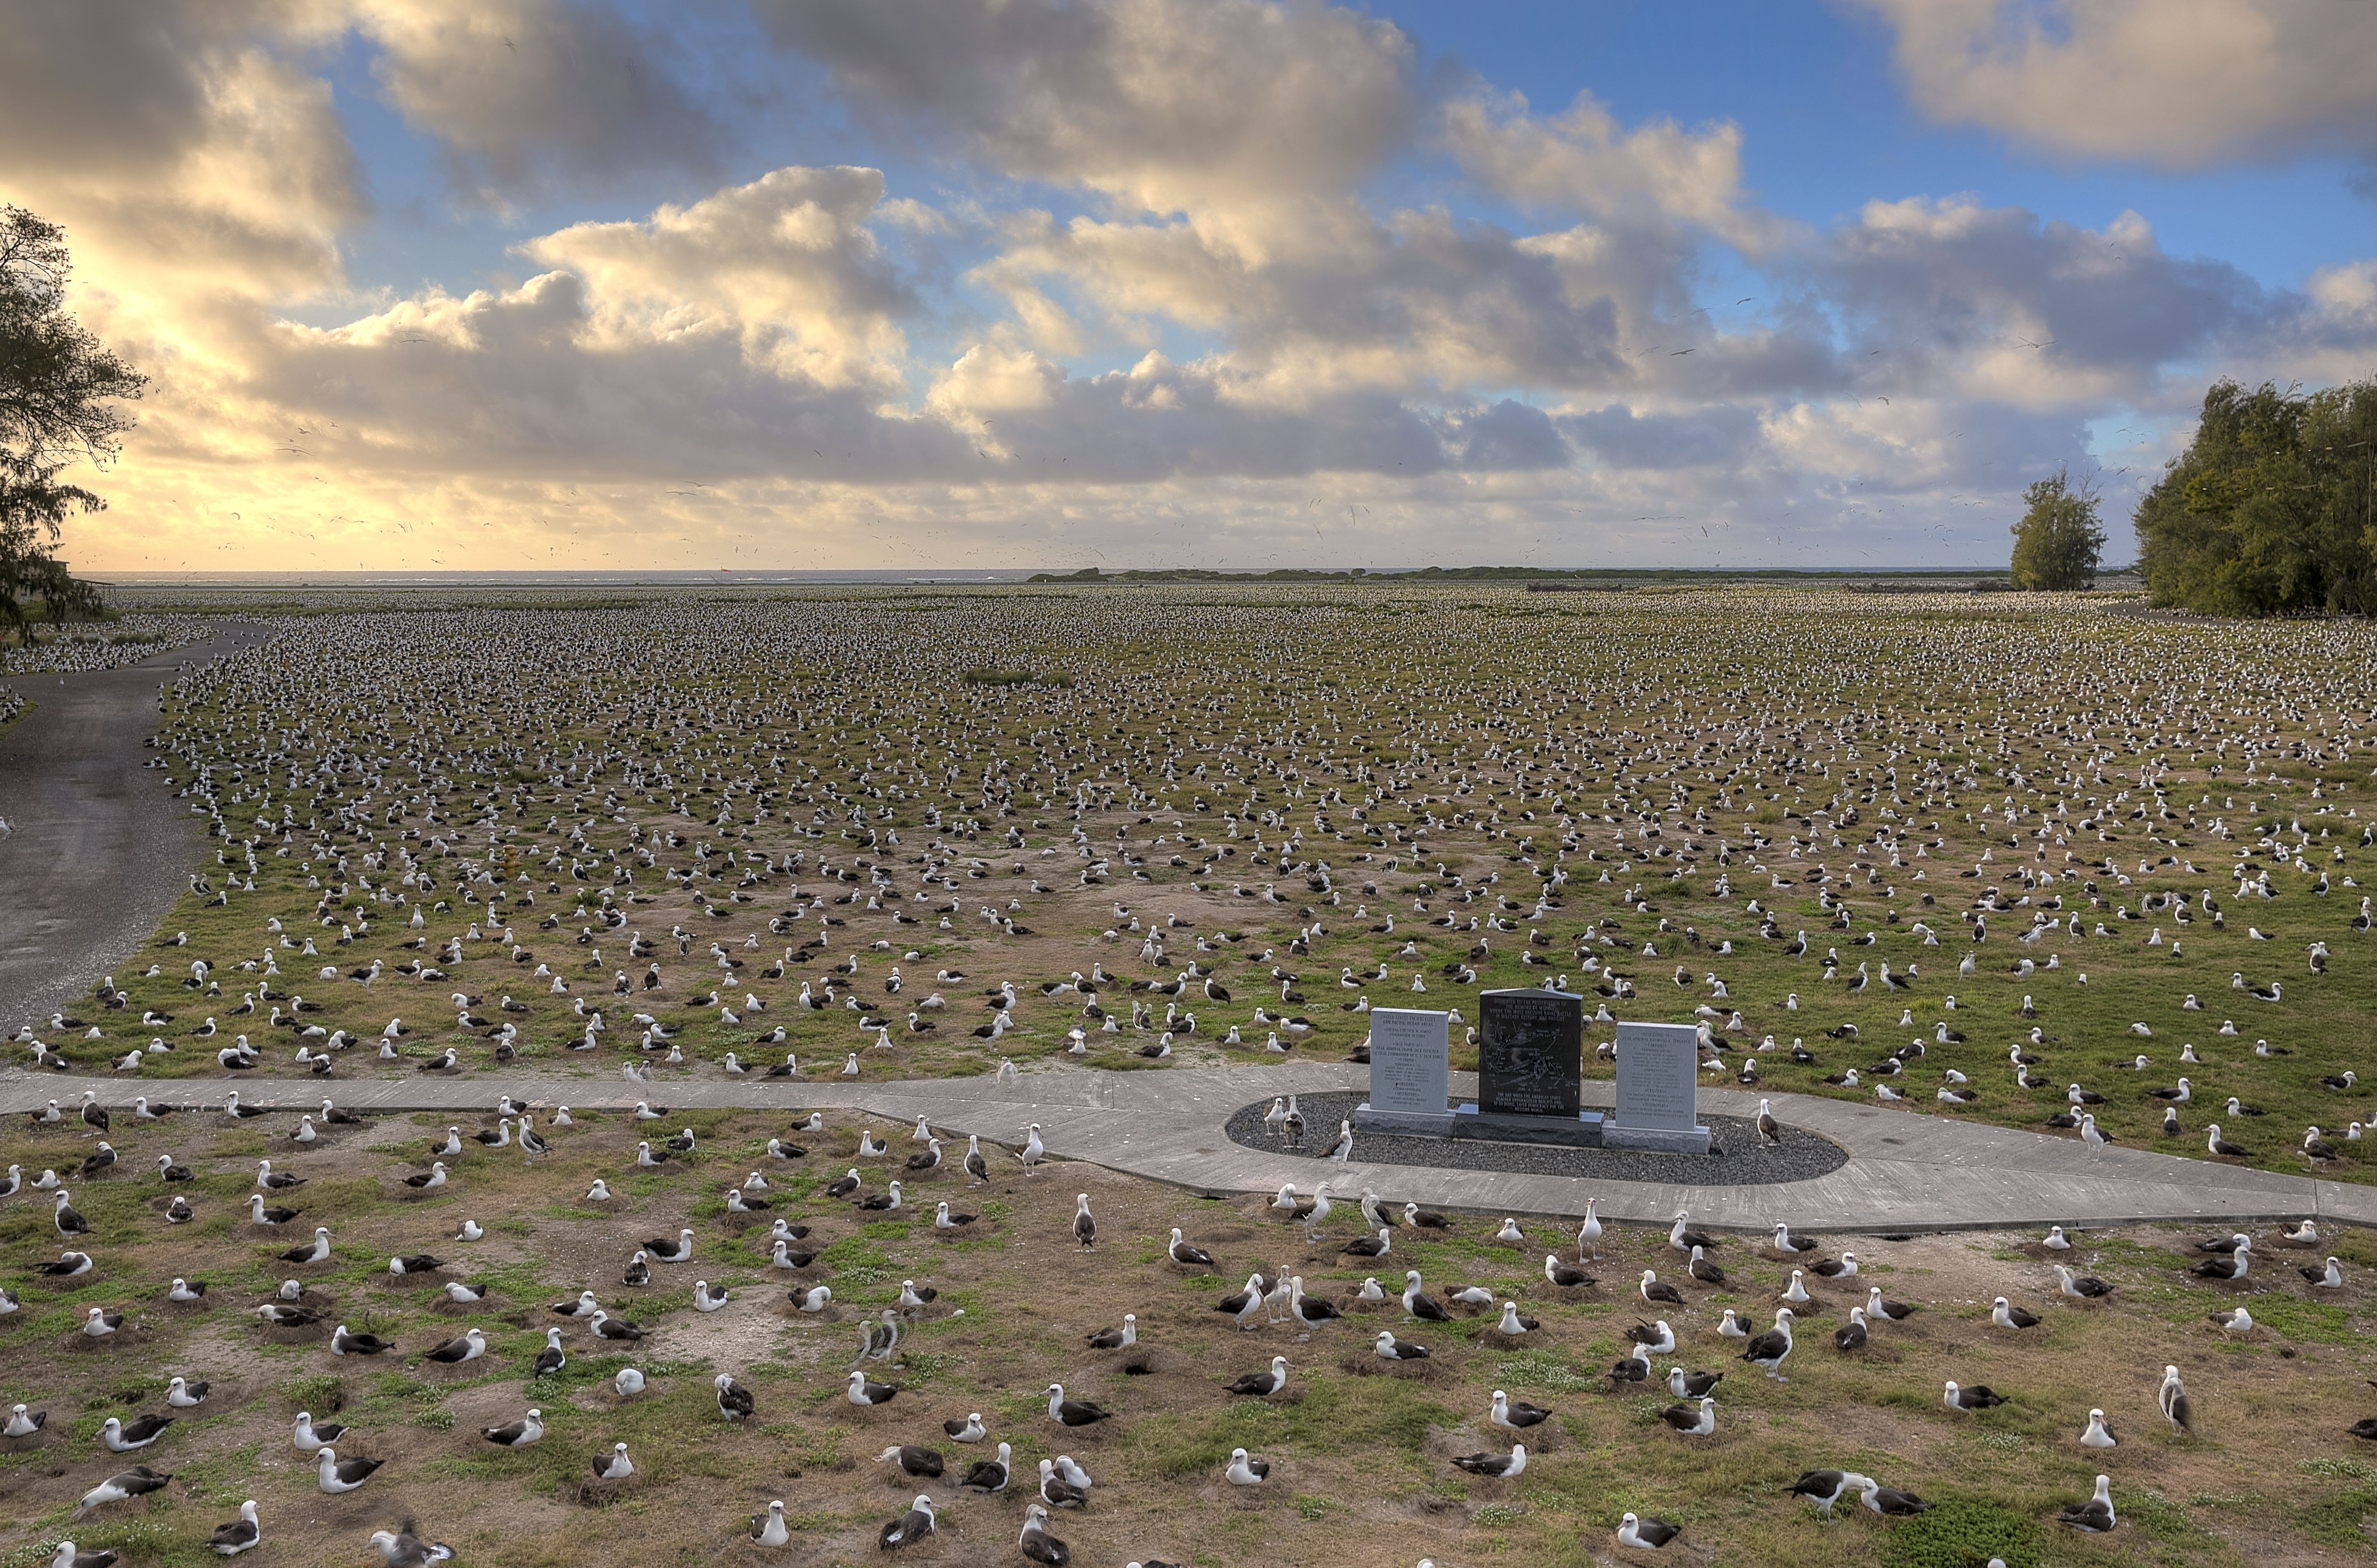 The IMMF Memorial surrounded by thousands of Laysan albatross as the sun rises.